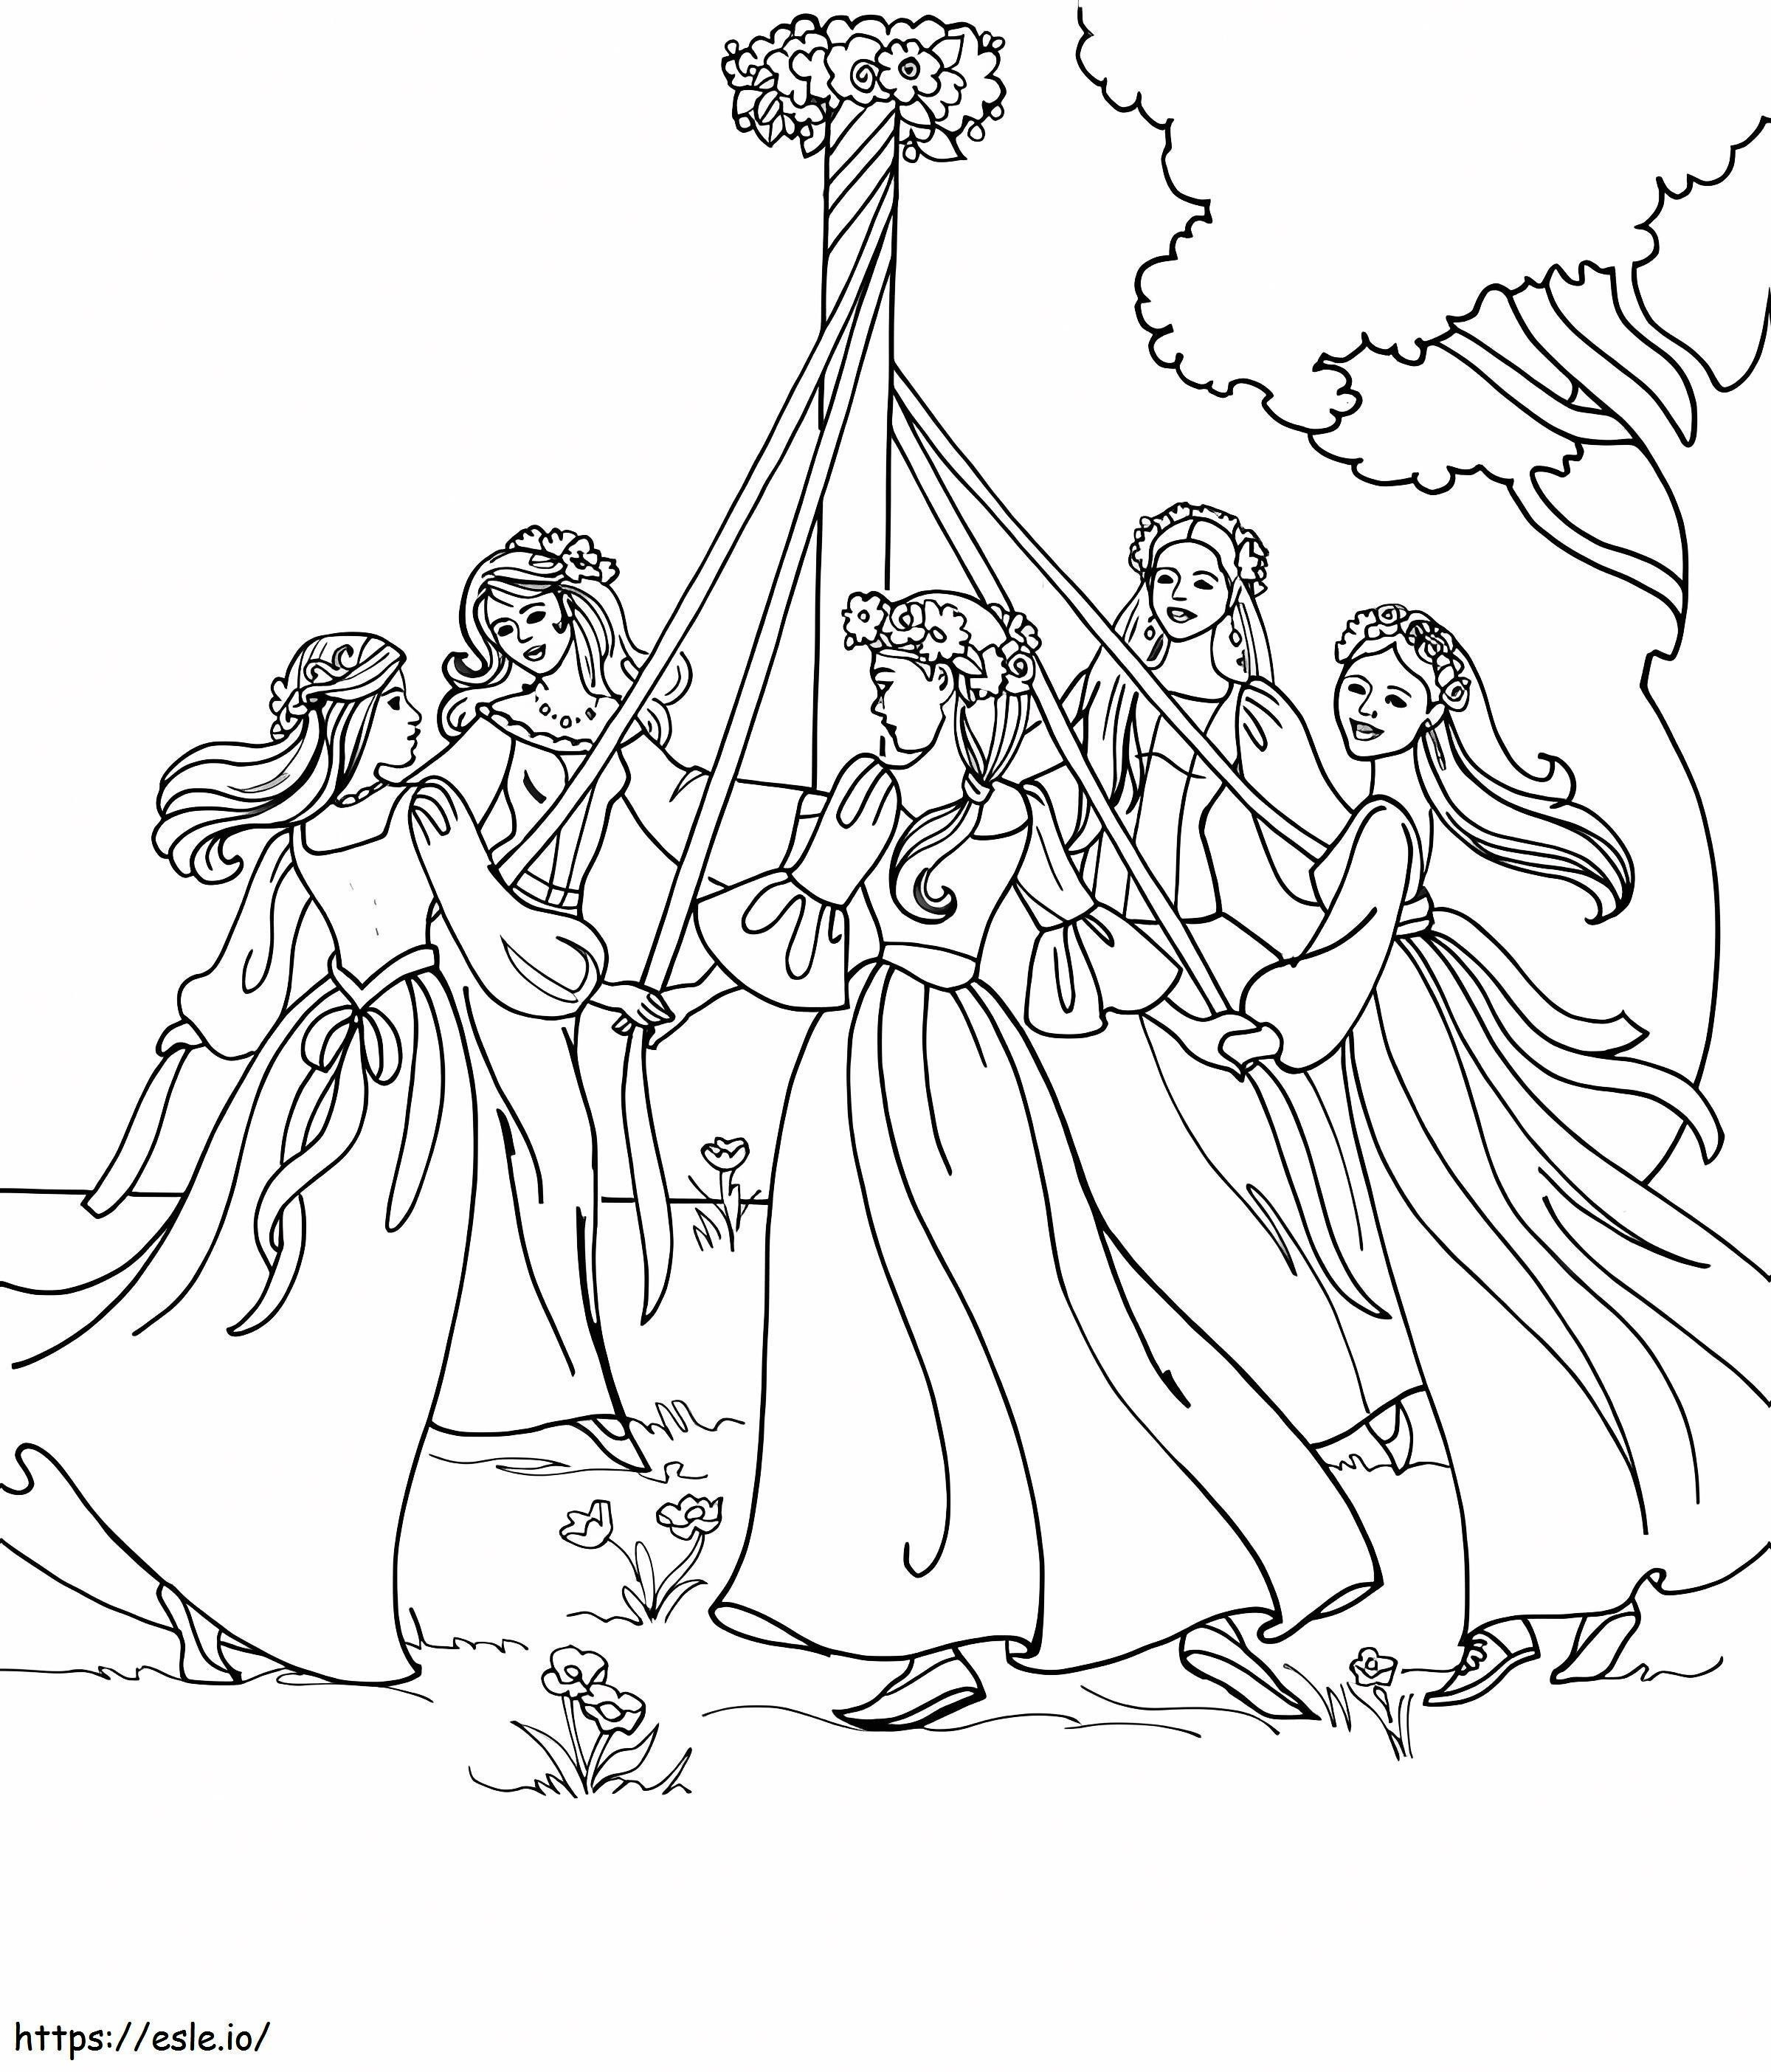 Girls On May Day coloring page